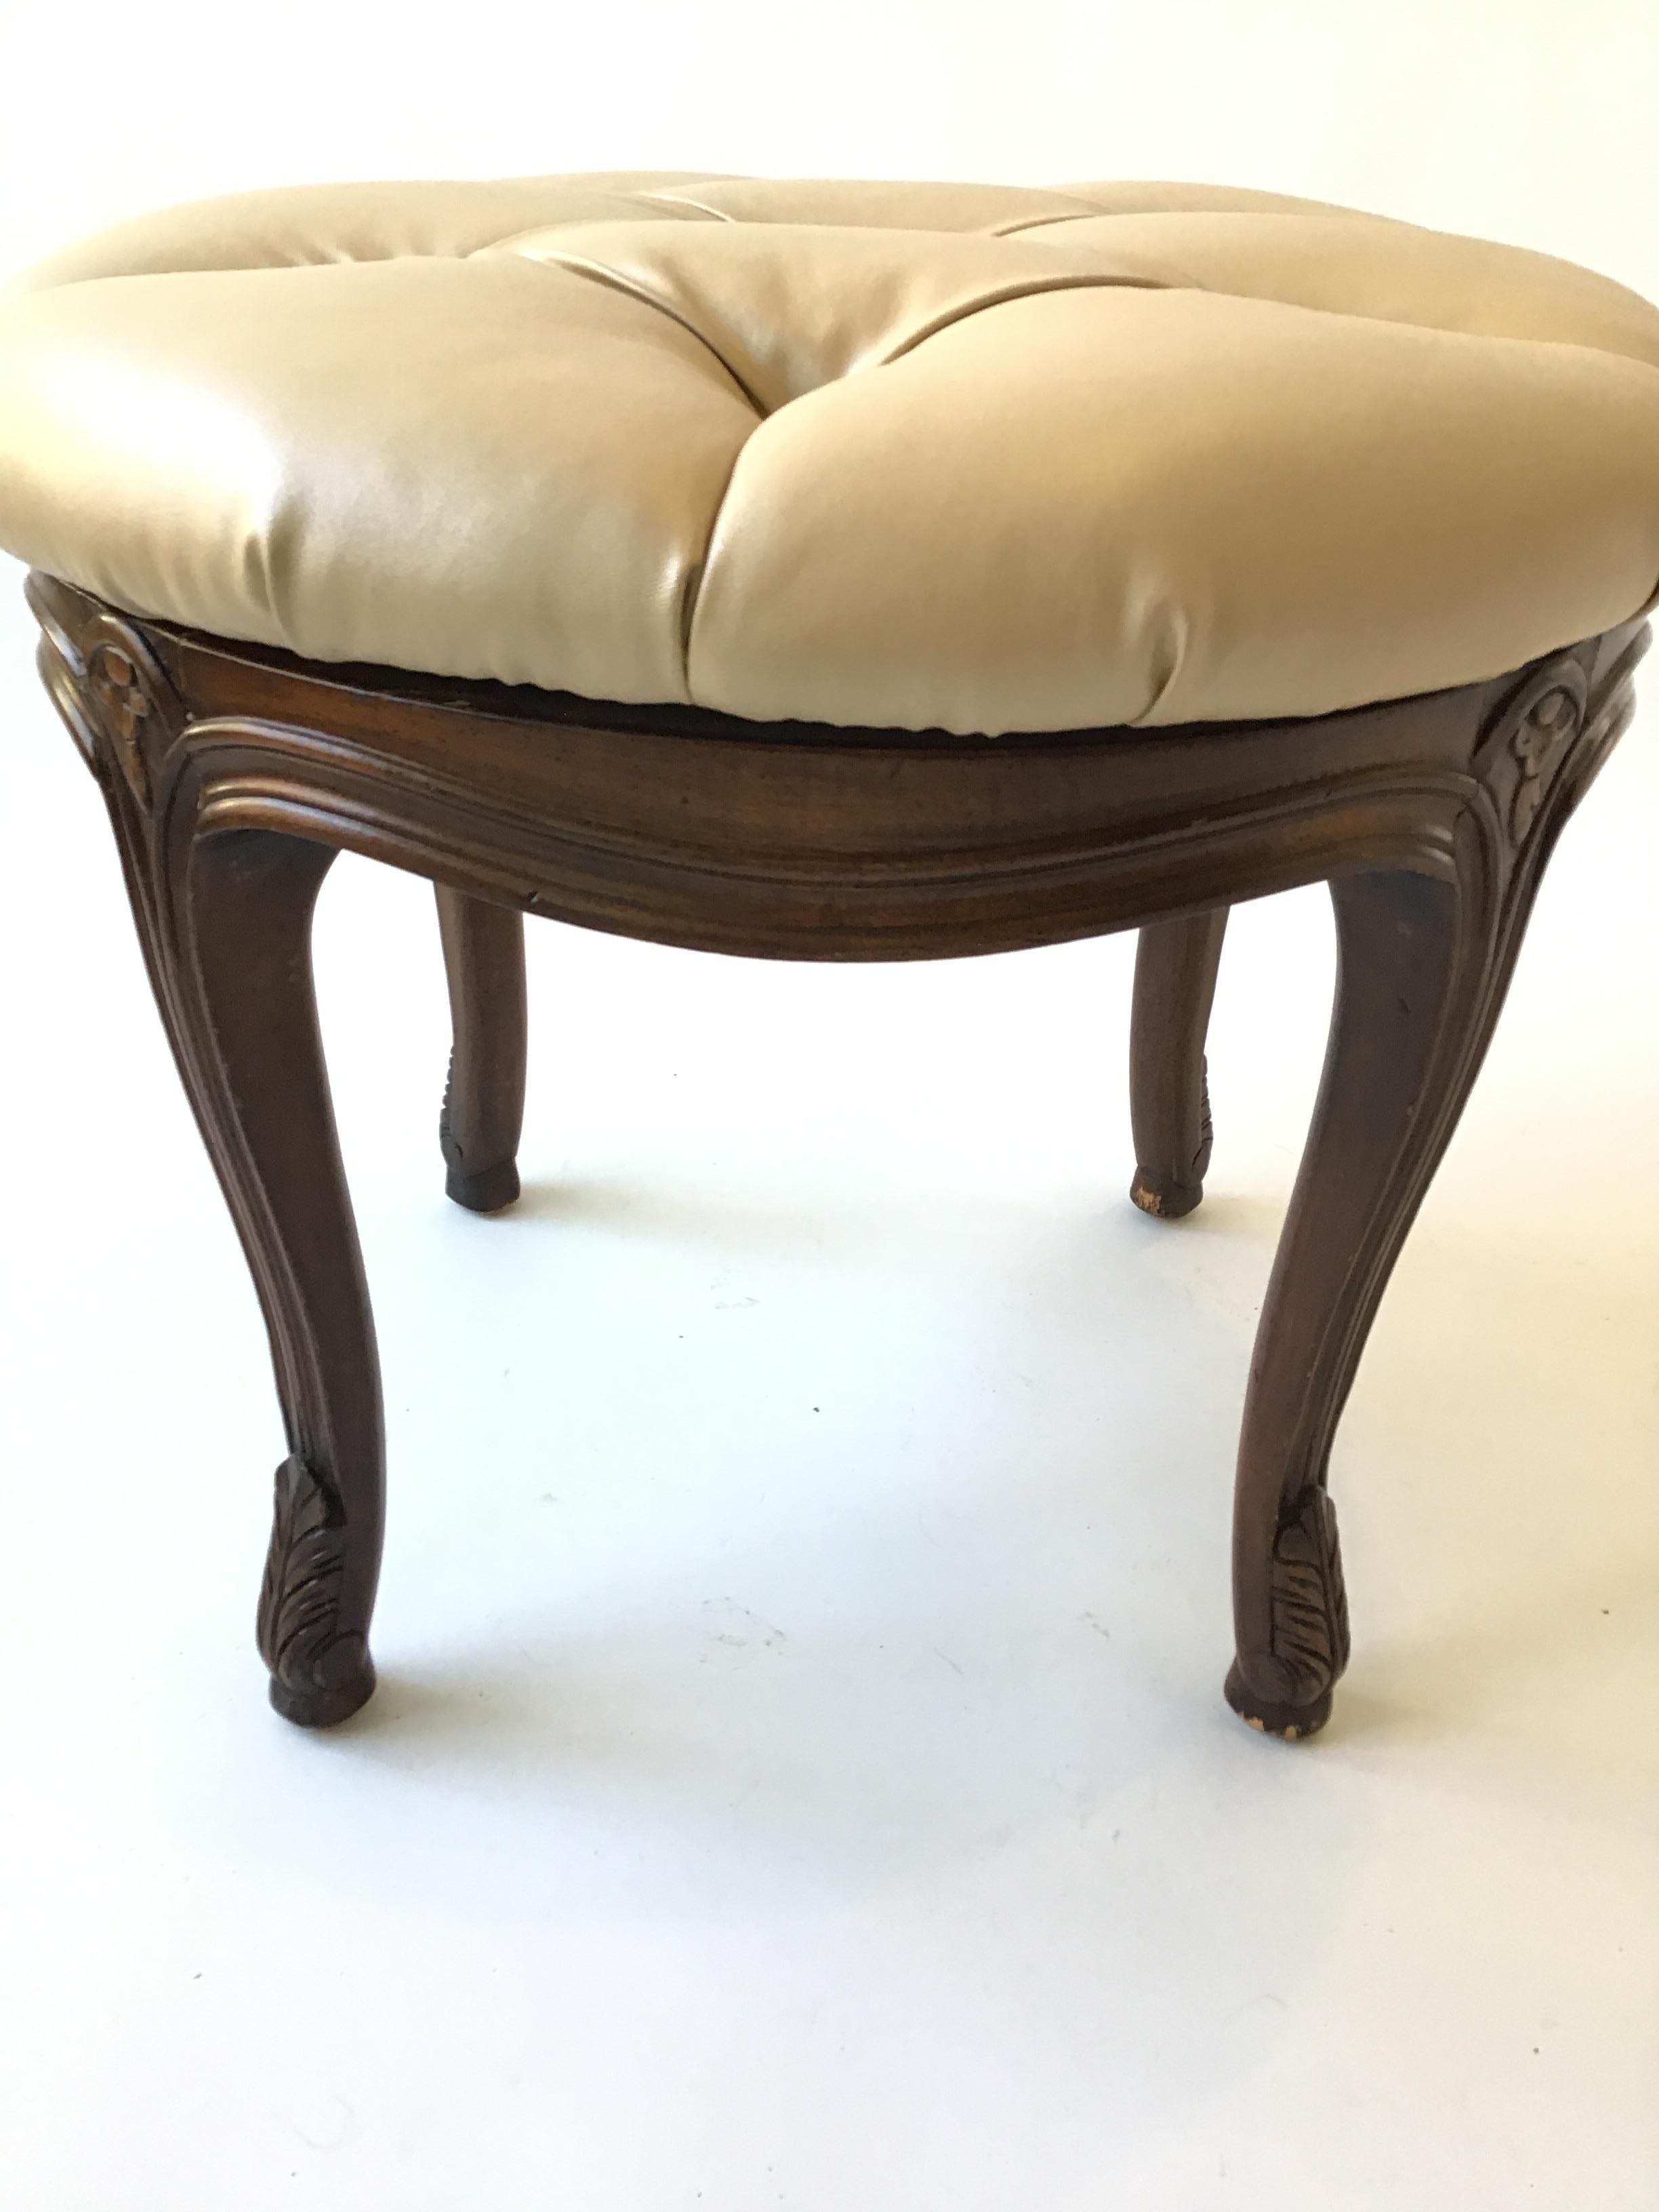 French Style Carved Wood Ottoman With Revolving Seat For Sale 3